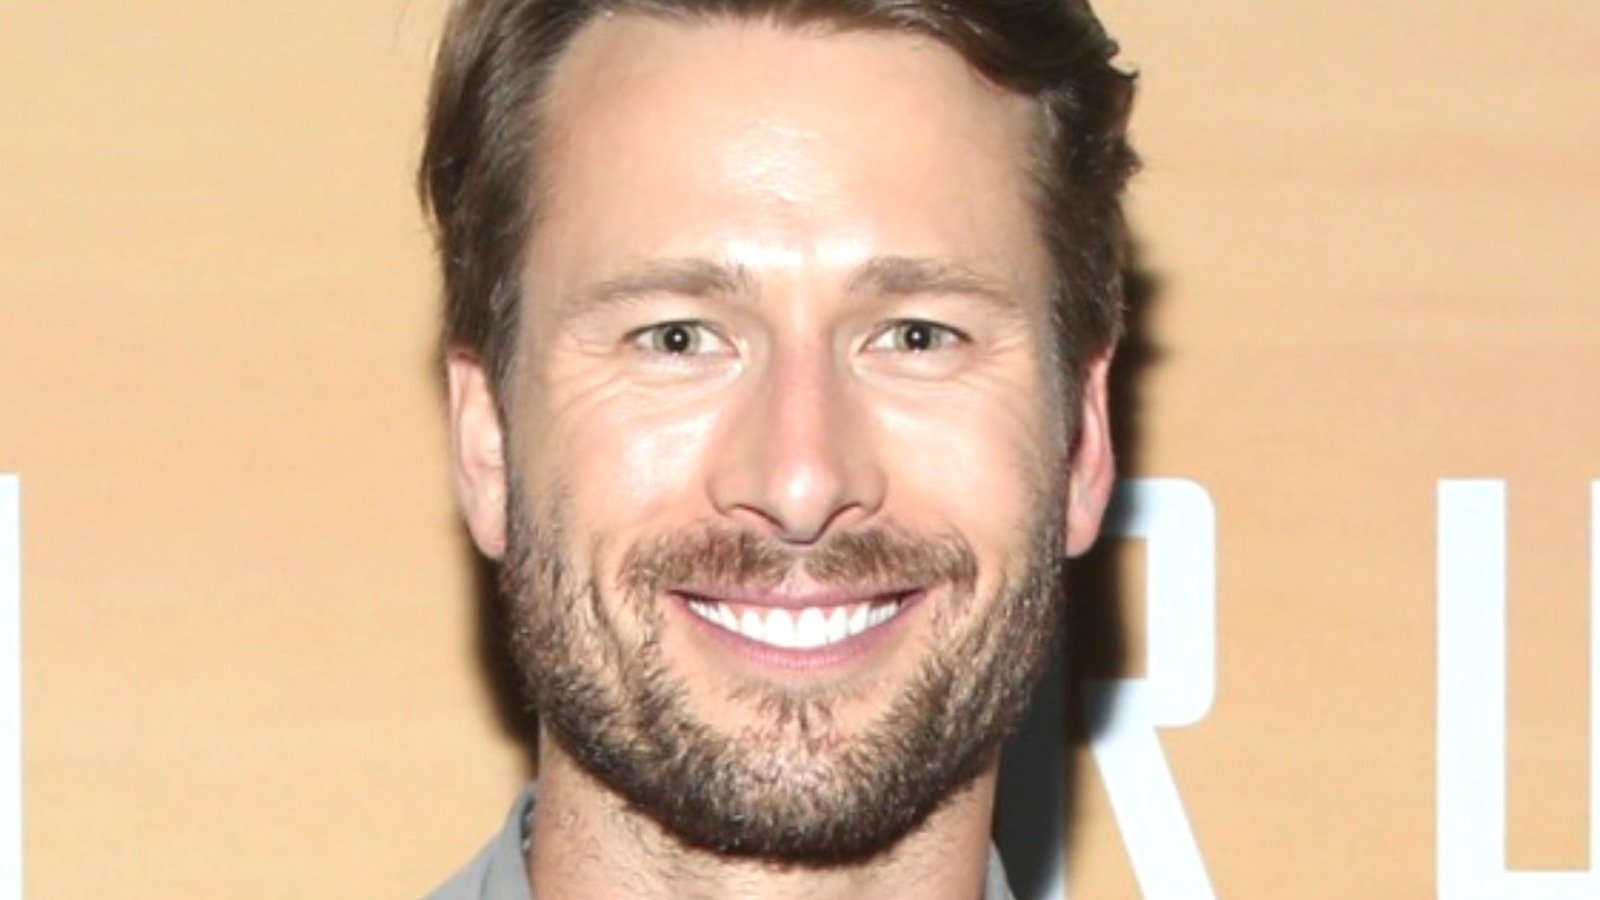 The Real Reason Glen Powell Changed His Mind About Top Gun: Maverick